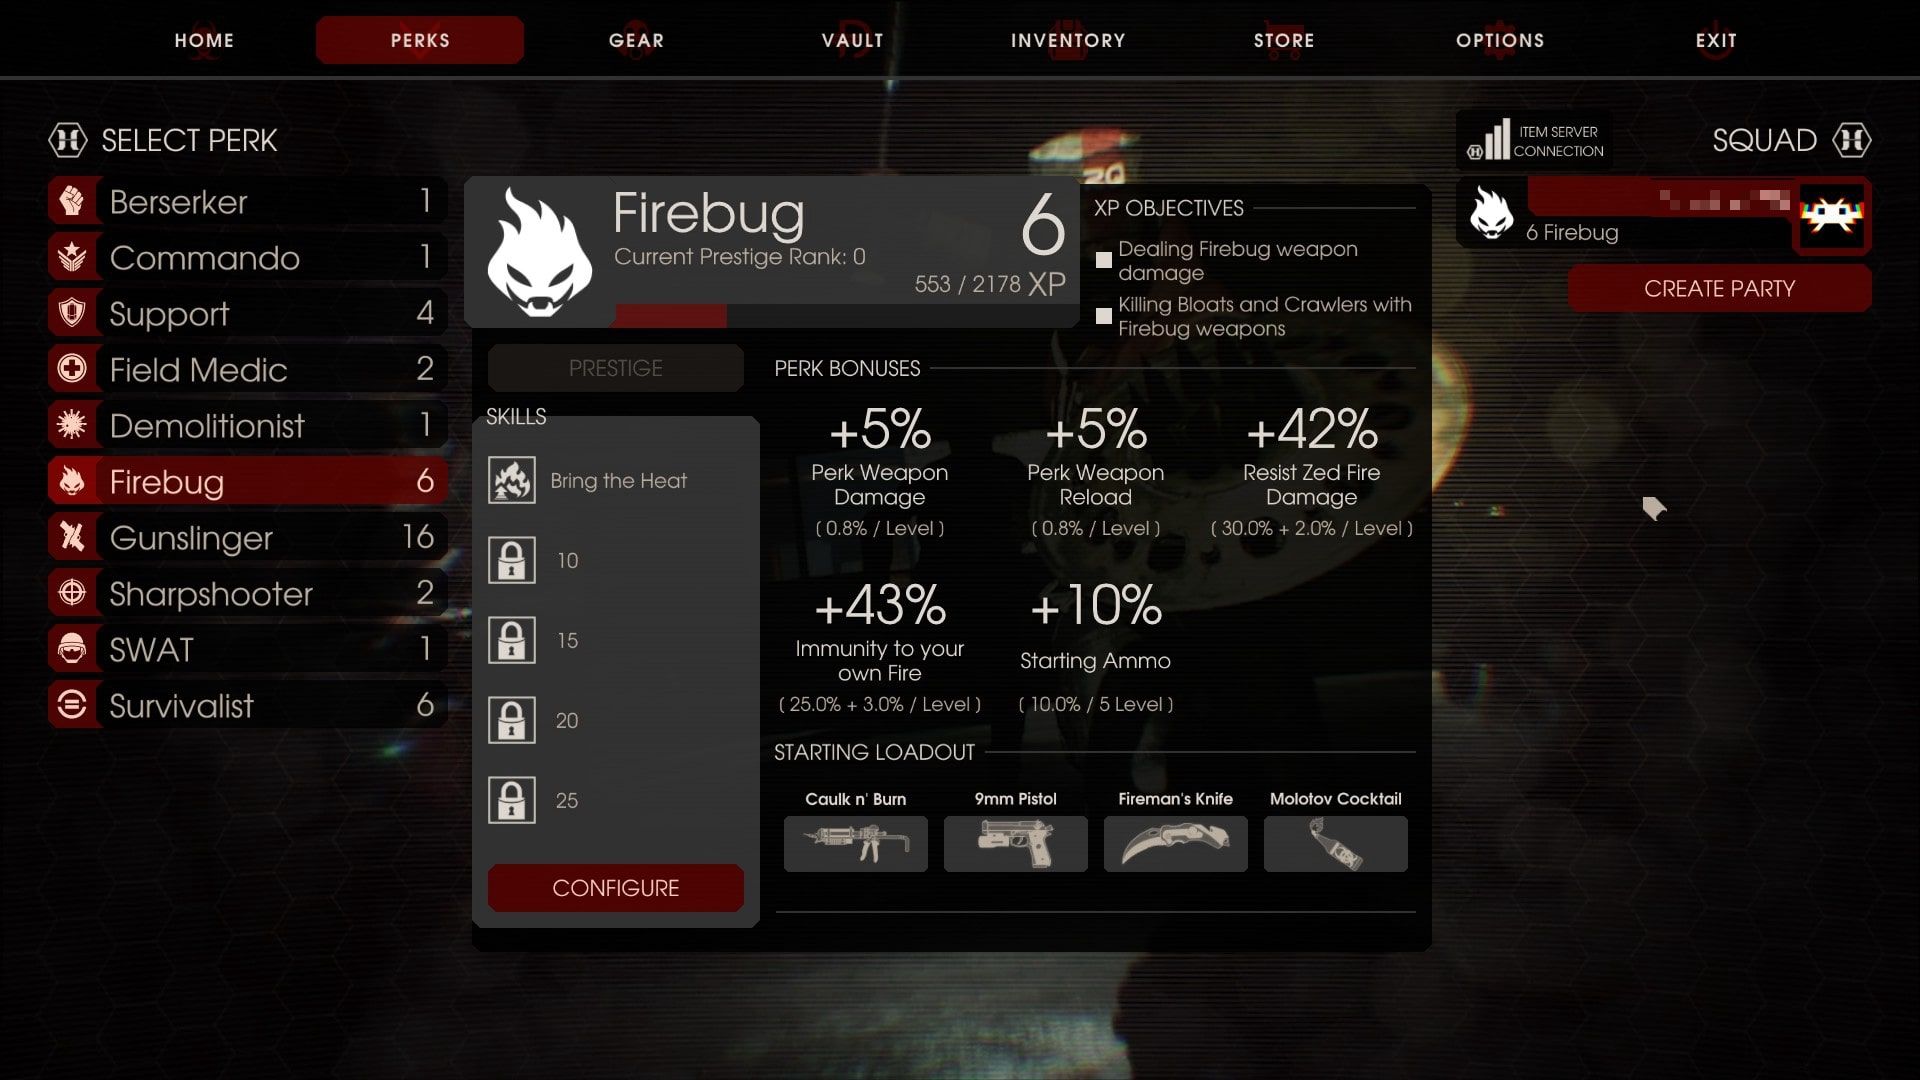 A screen showing the Firebug perk in Killing Floor 2